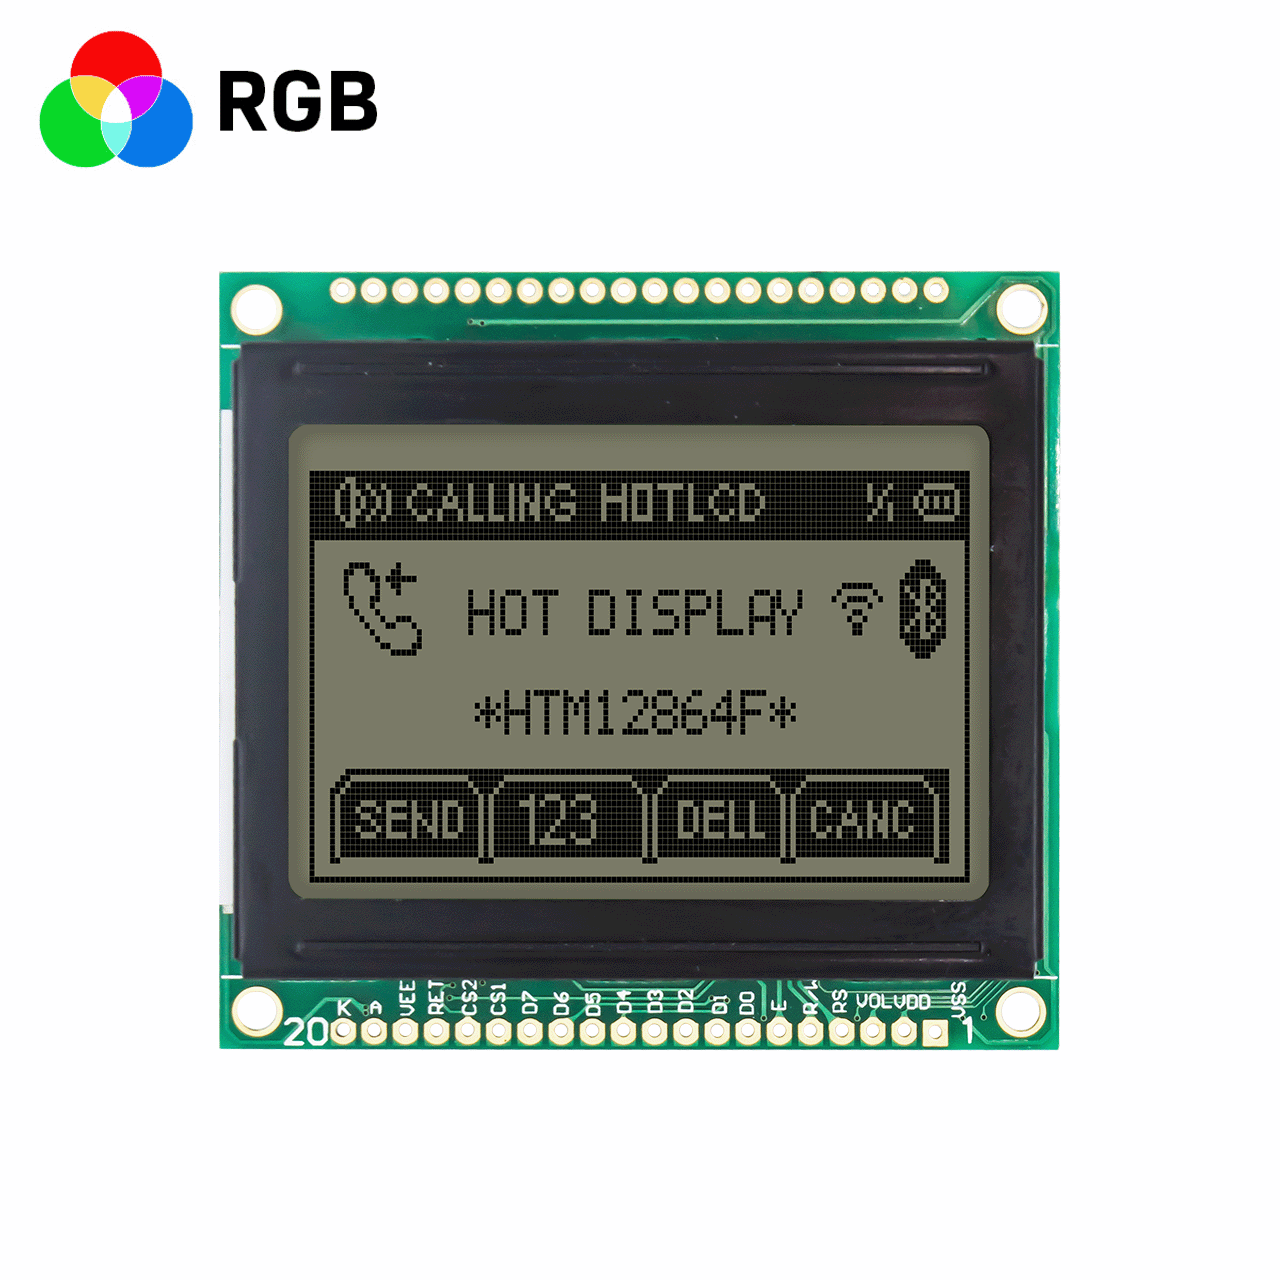 2" low cost 128X64 graphic LCD module | 12864 graphic LCD display | FSTN positive display | RGB red, green and blue | Adruino